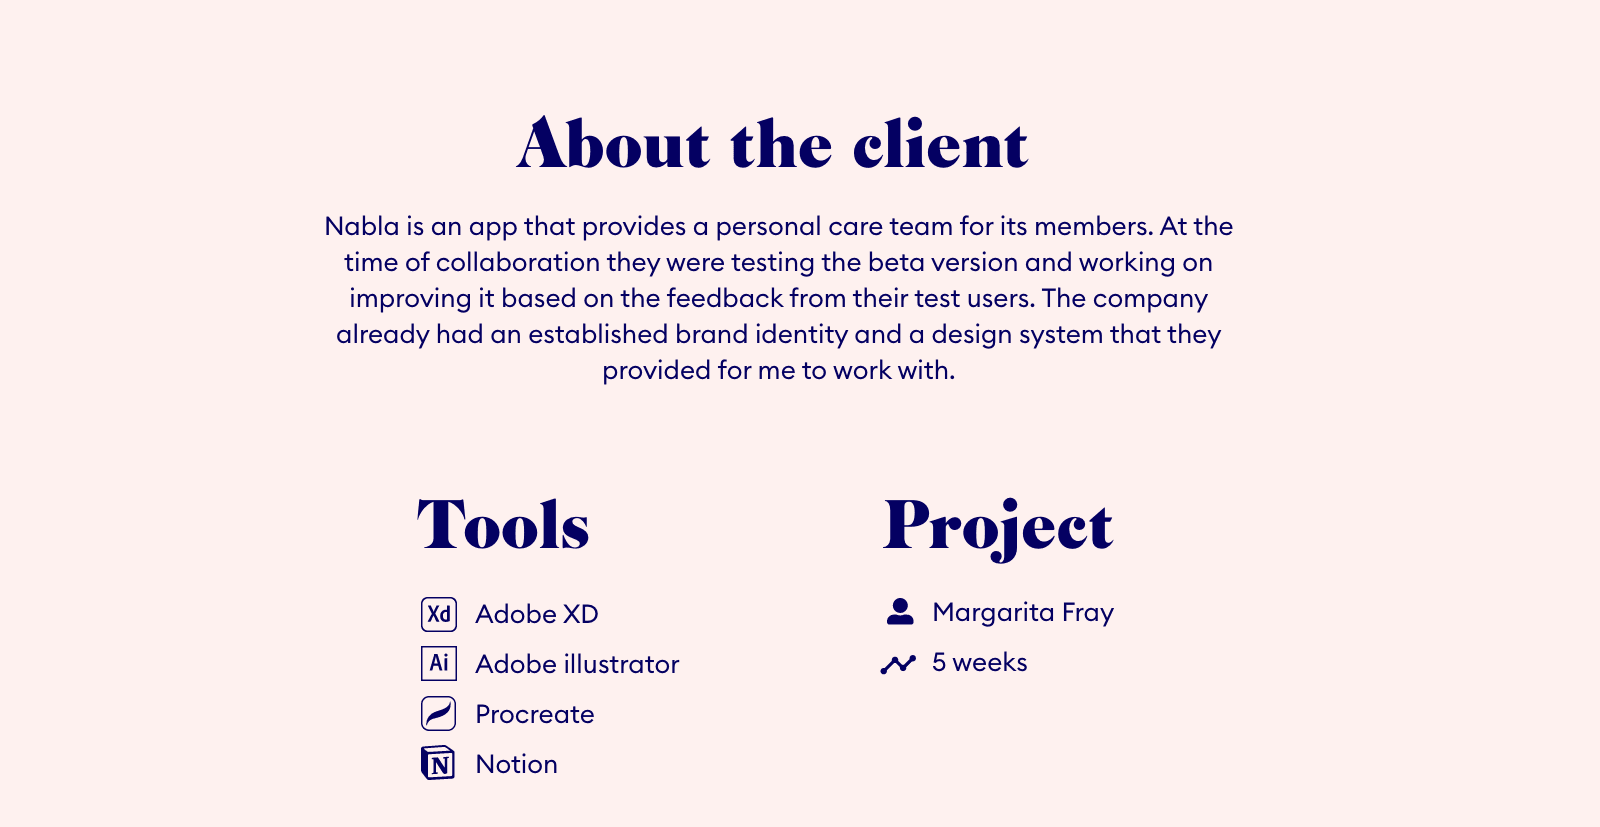 About the client, tools used, details of the project